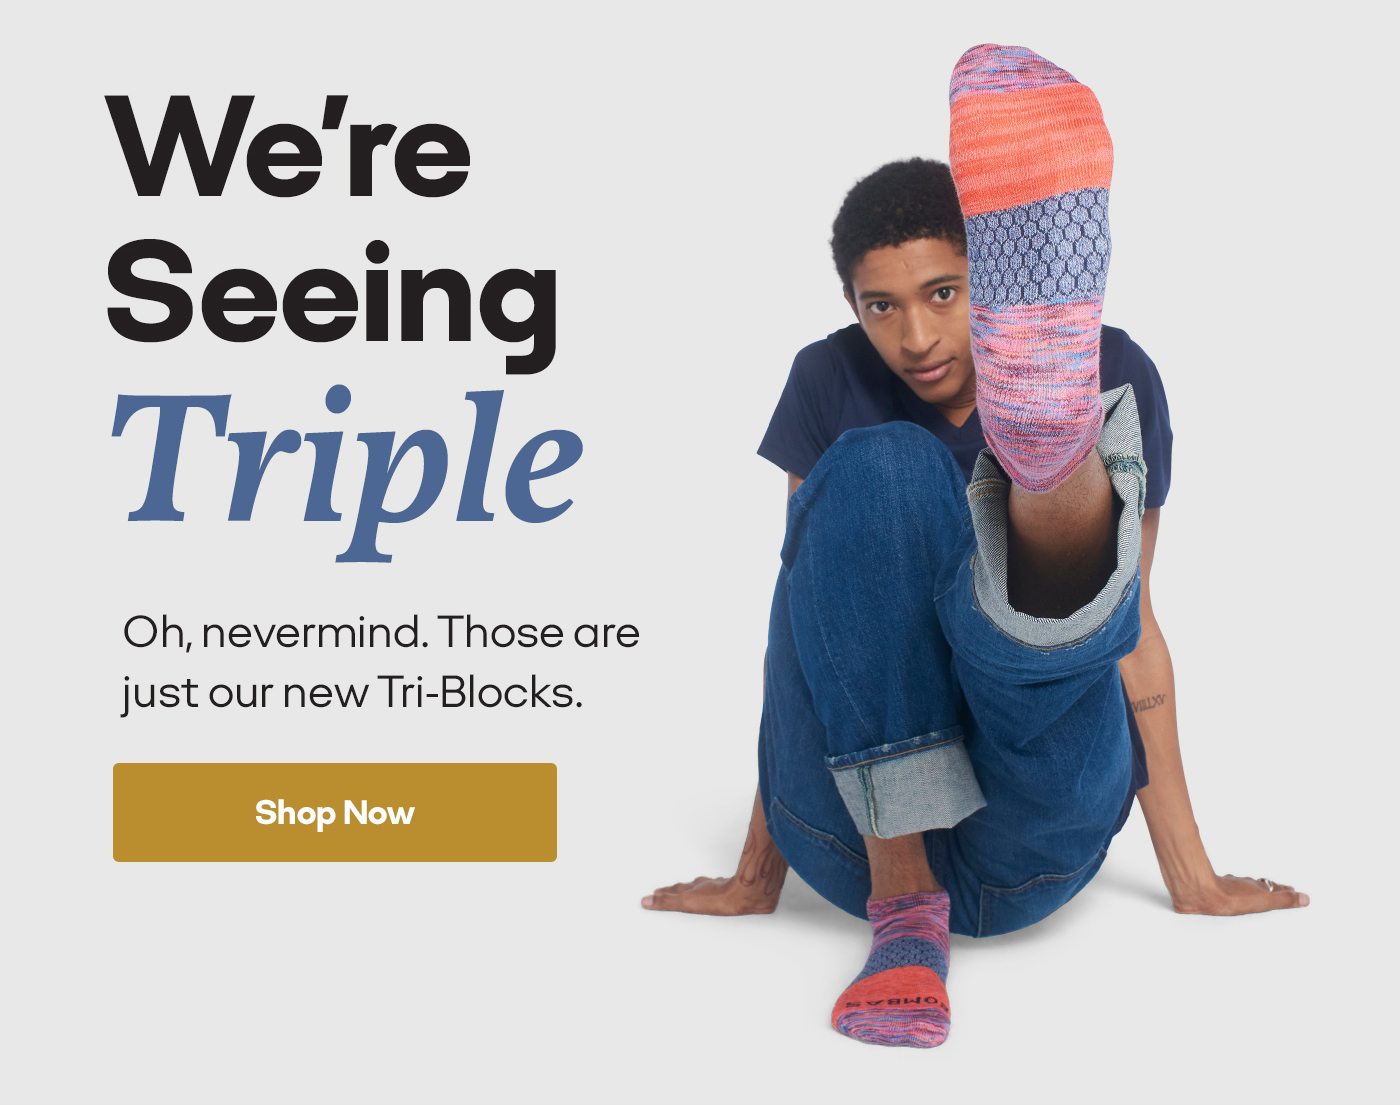 We're Seeing Triple. Oh, nevermind. Those are just our new Tri-Blocks. Shop Now.